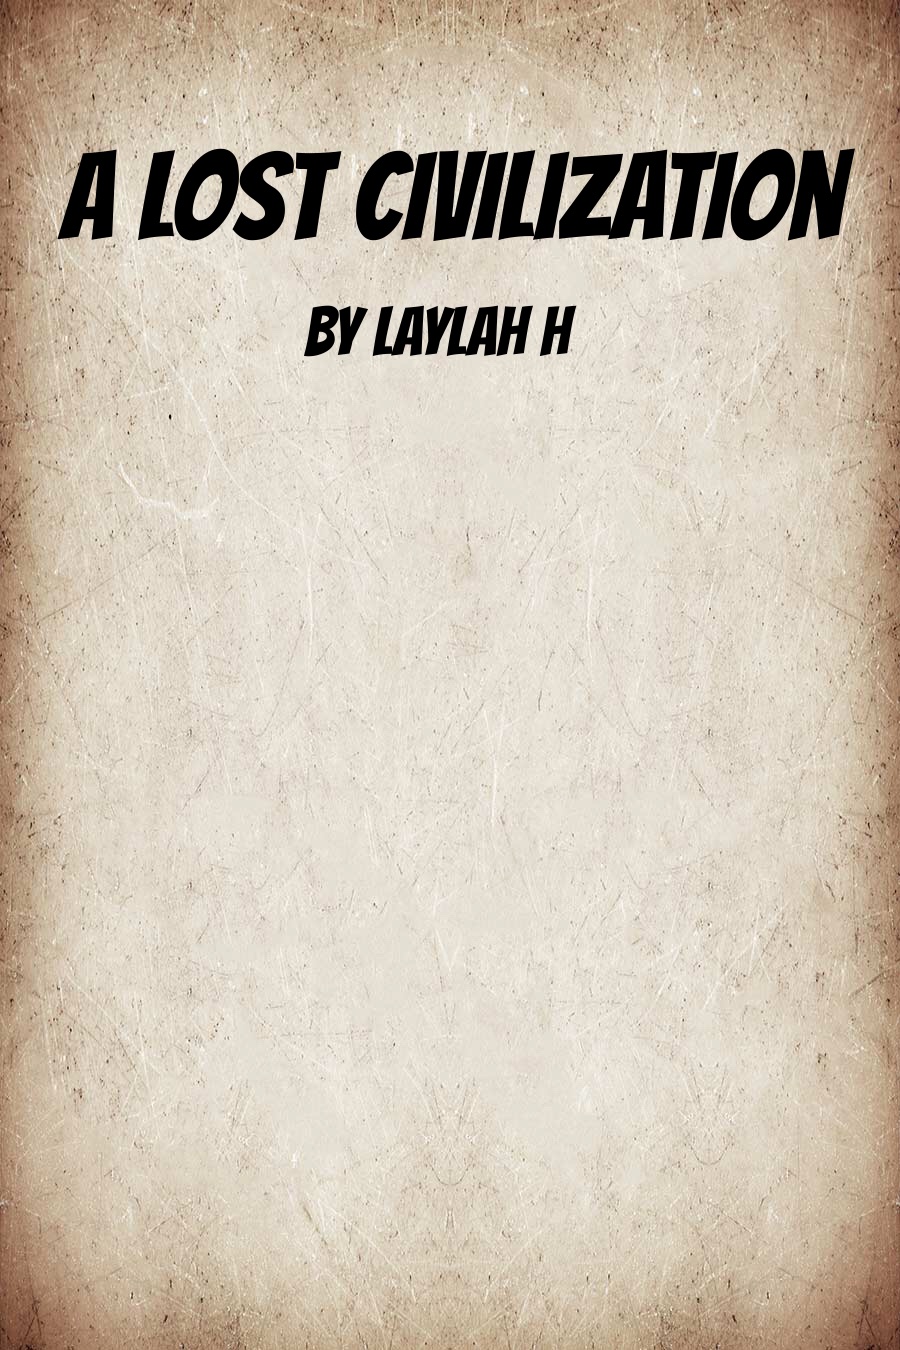 A Lost Civilization by Laylah H